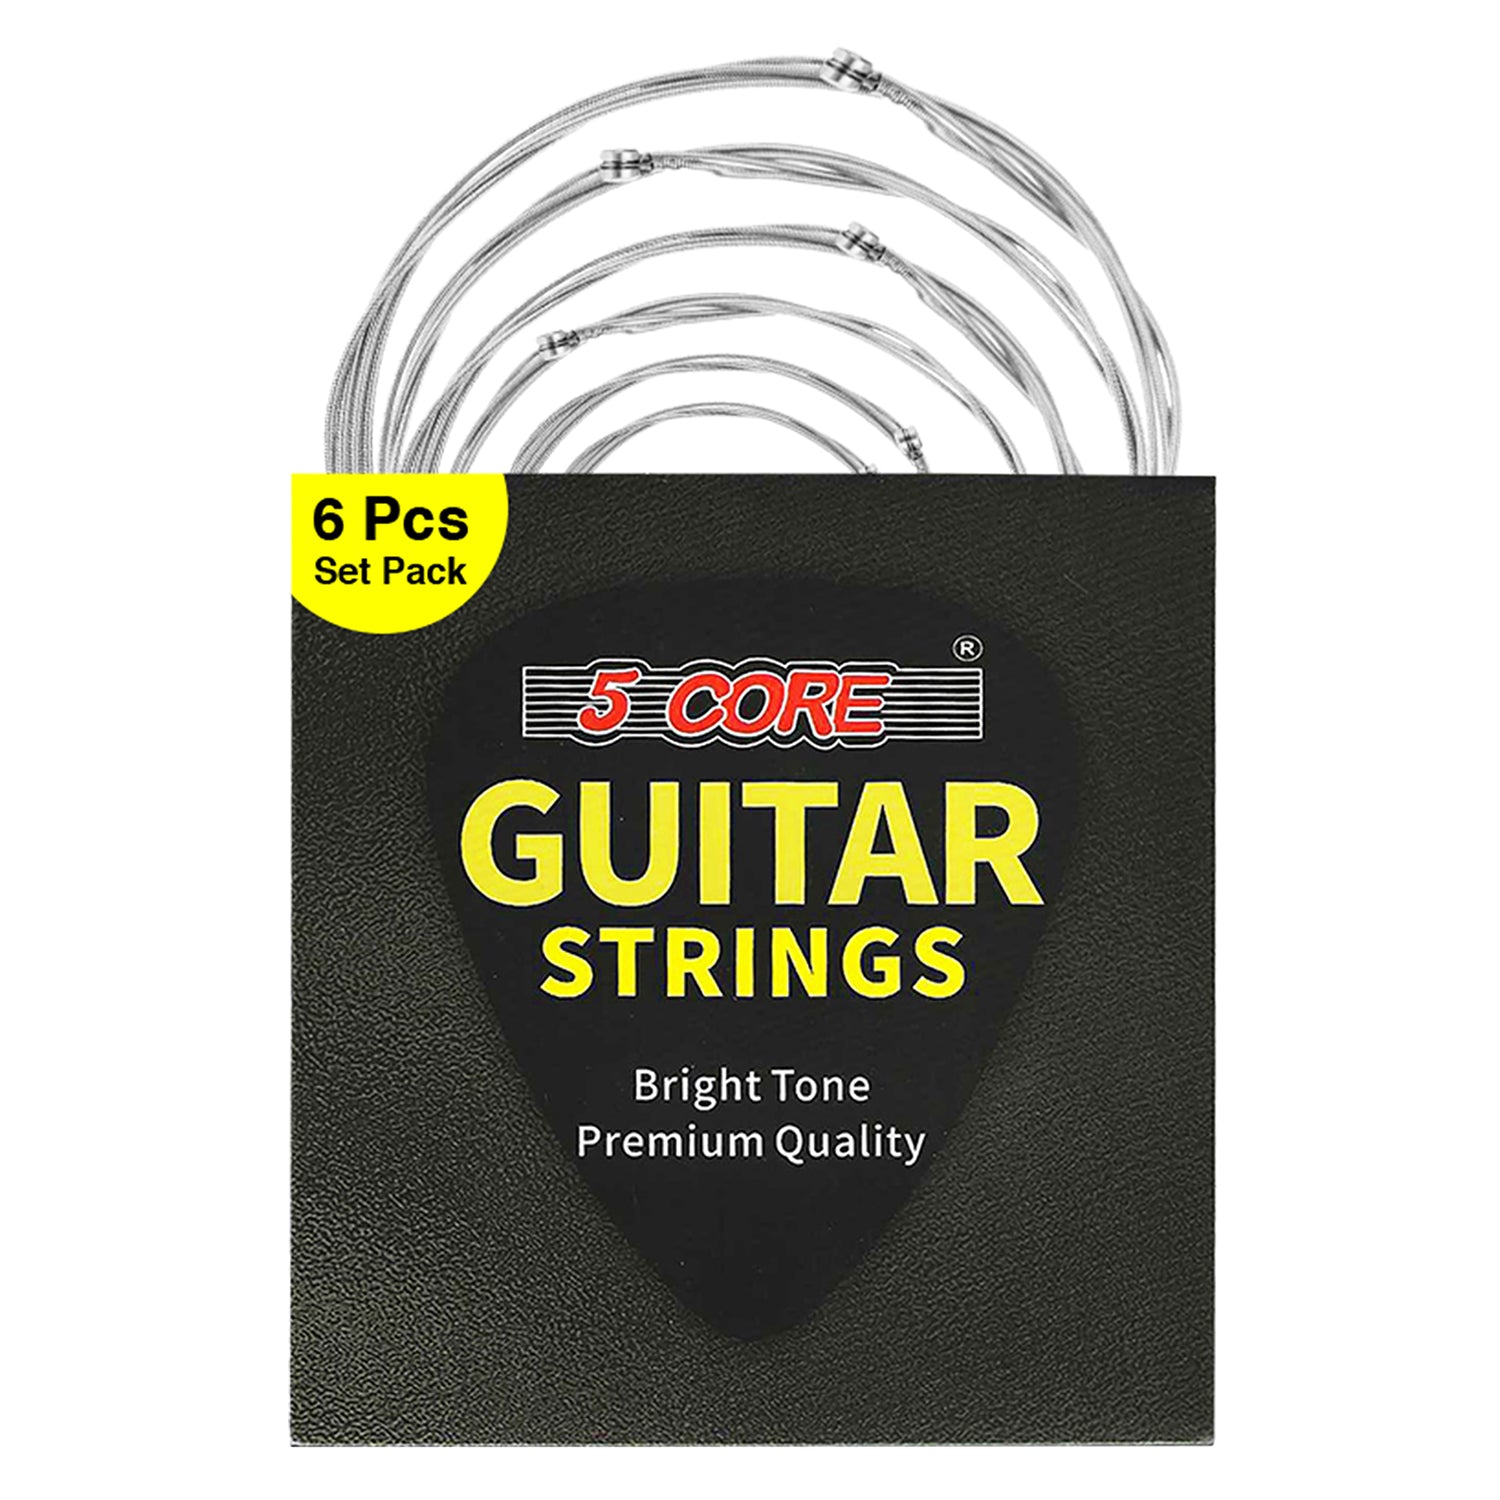 5Core Acoustic Guitar Strings 0.010-0.048 Steel Gauge w Deep Bright Tone Consistent Feel for 6 String Guitars